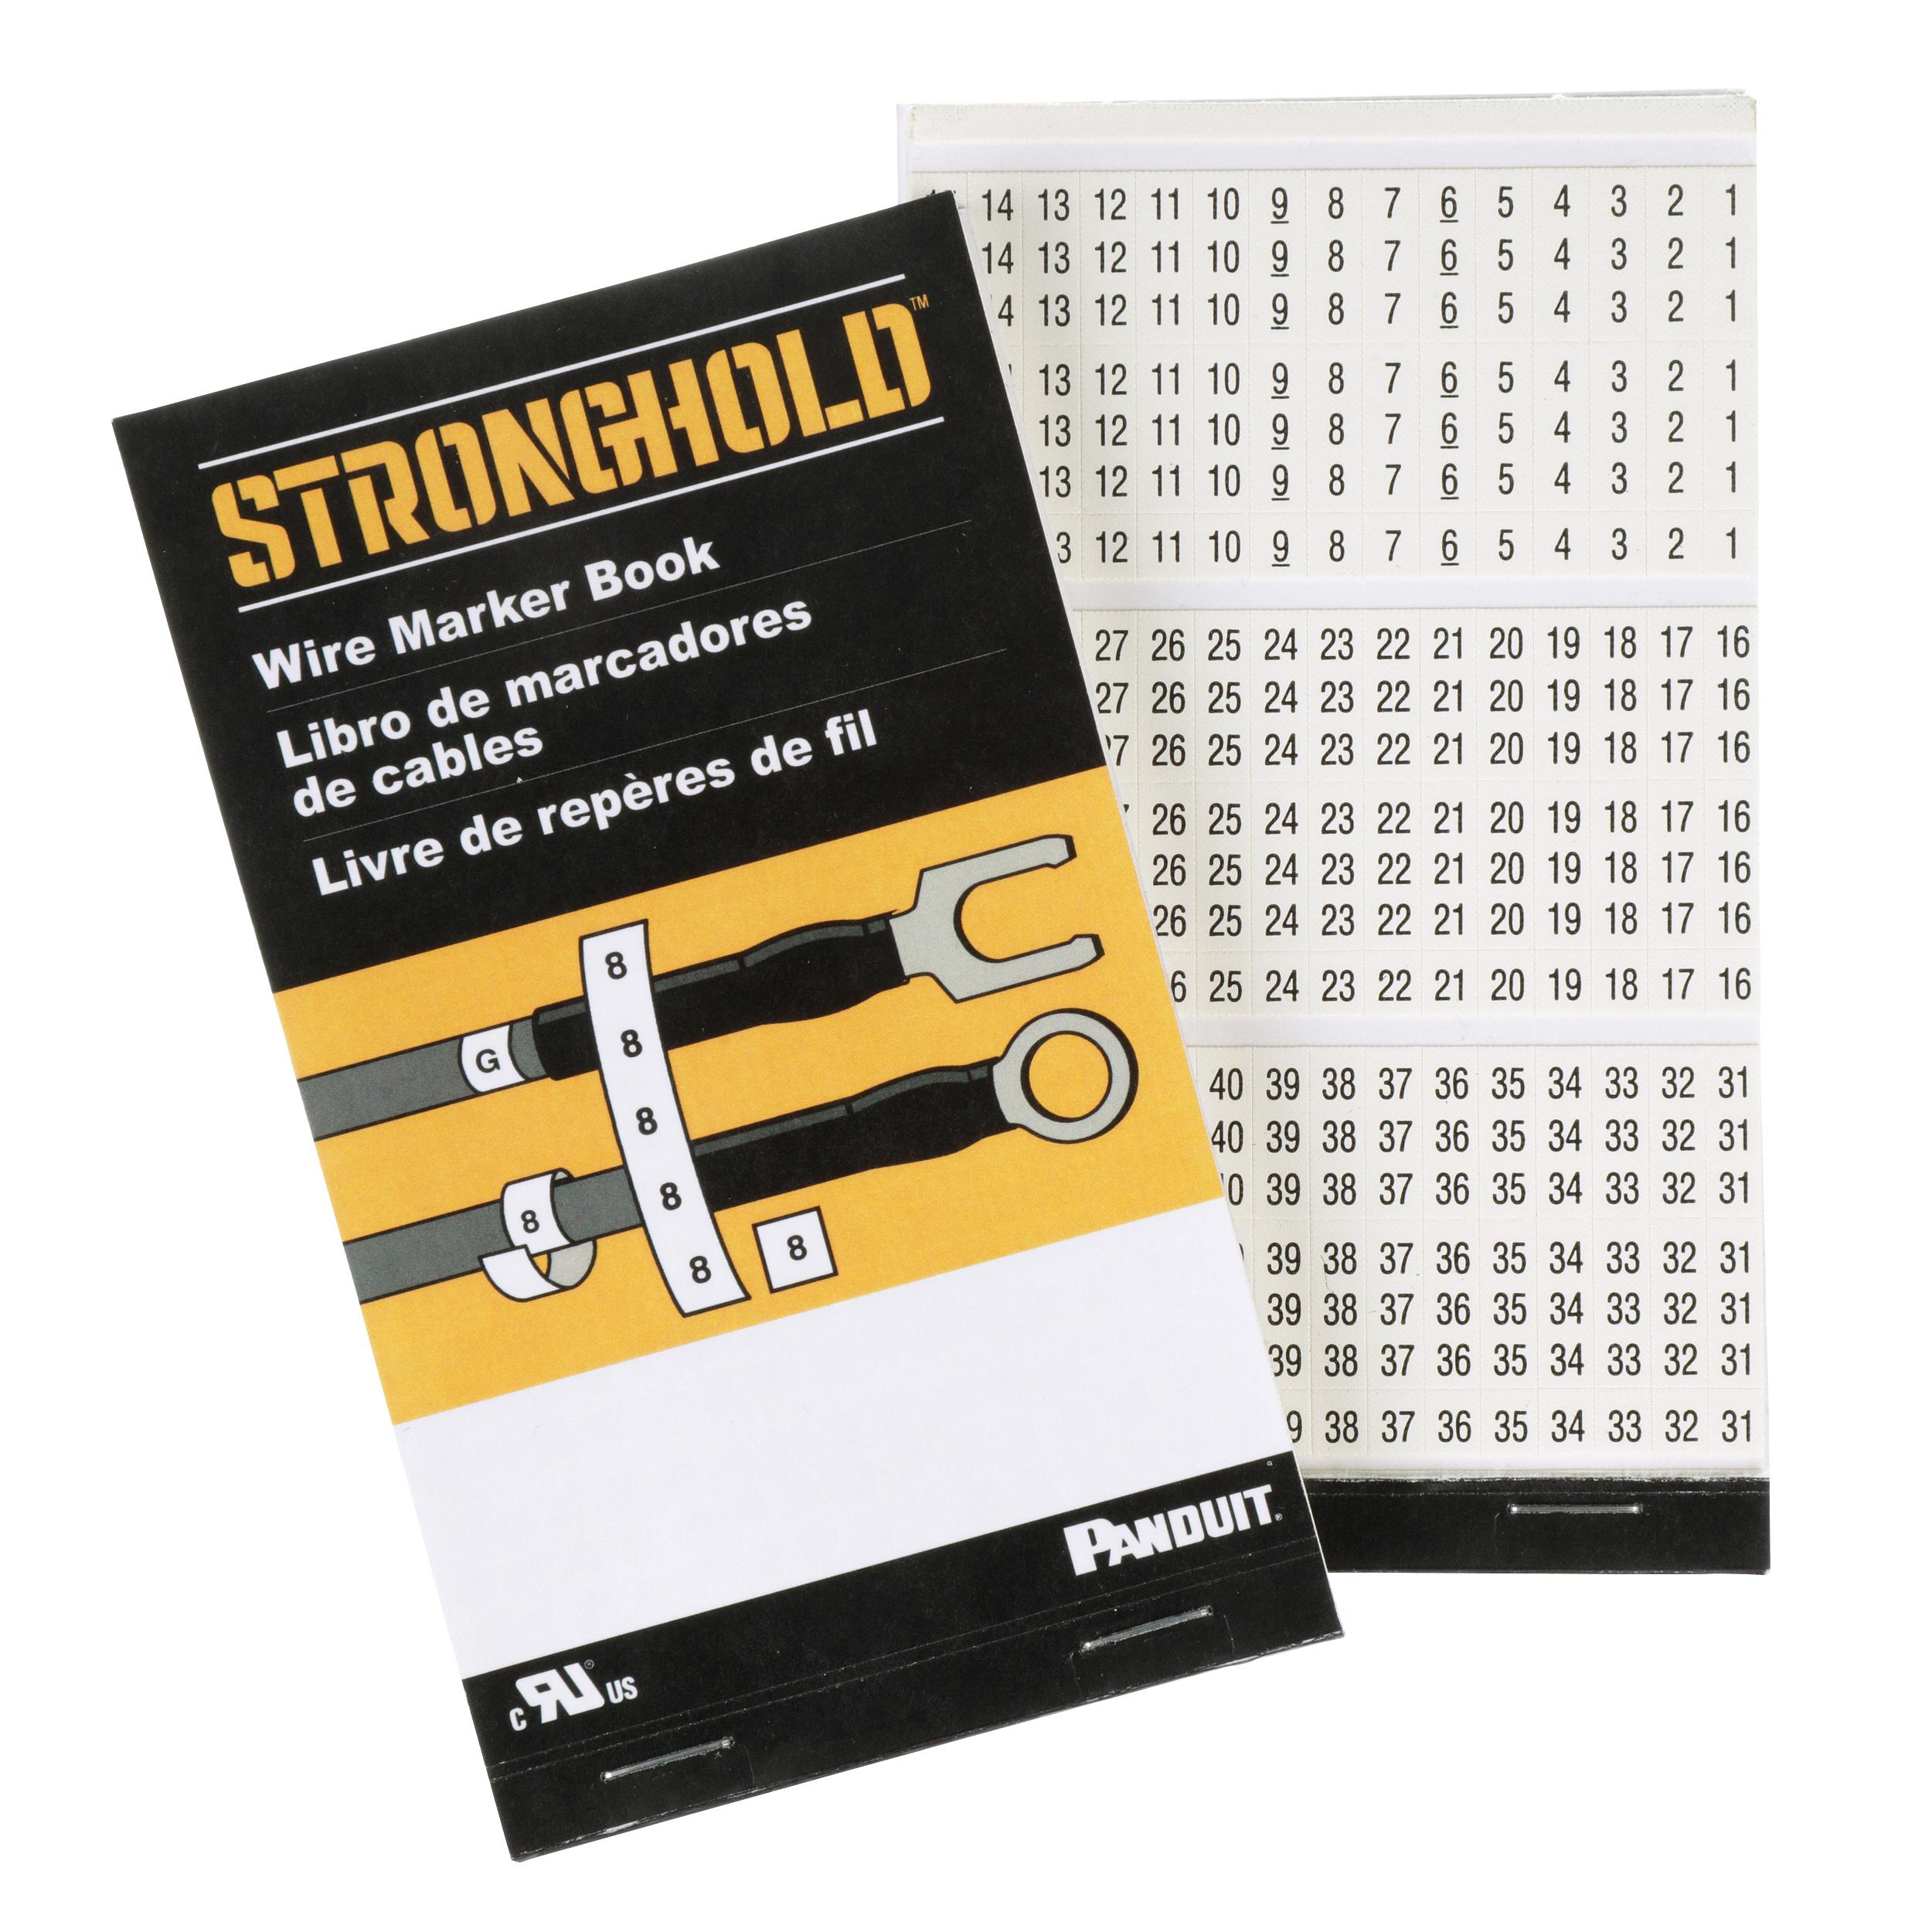 Panduit PCMB-4 StrongHold PCMB-4 Pre-Printed Wire Marker Books